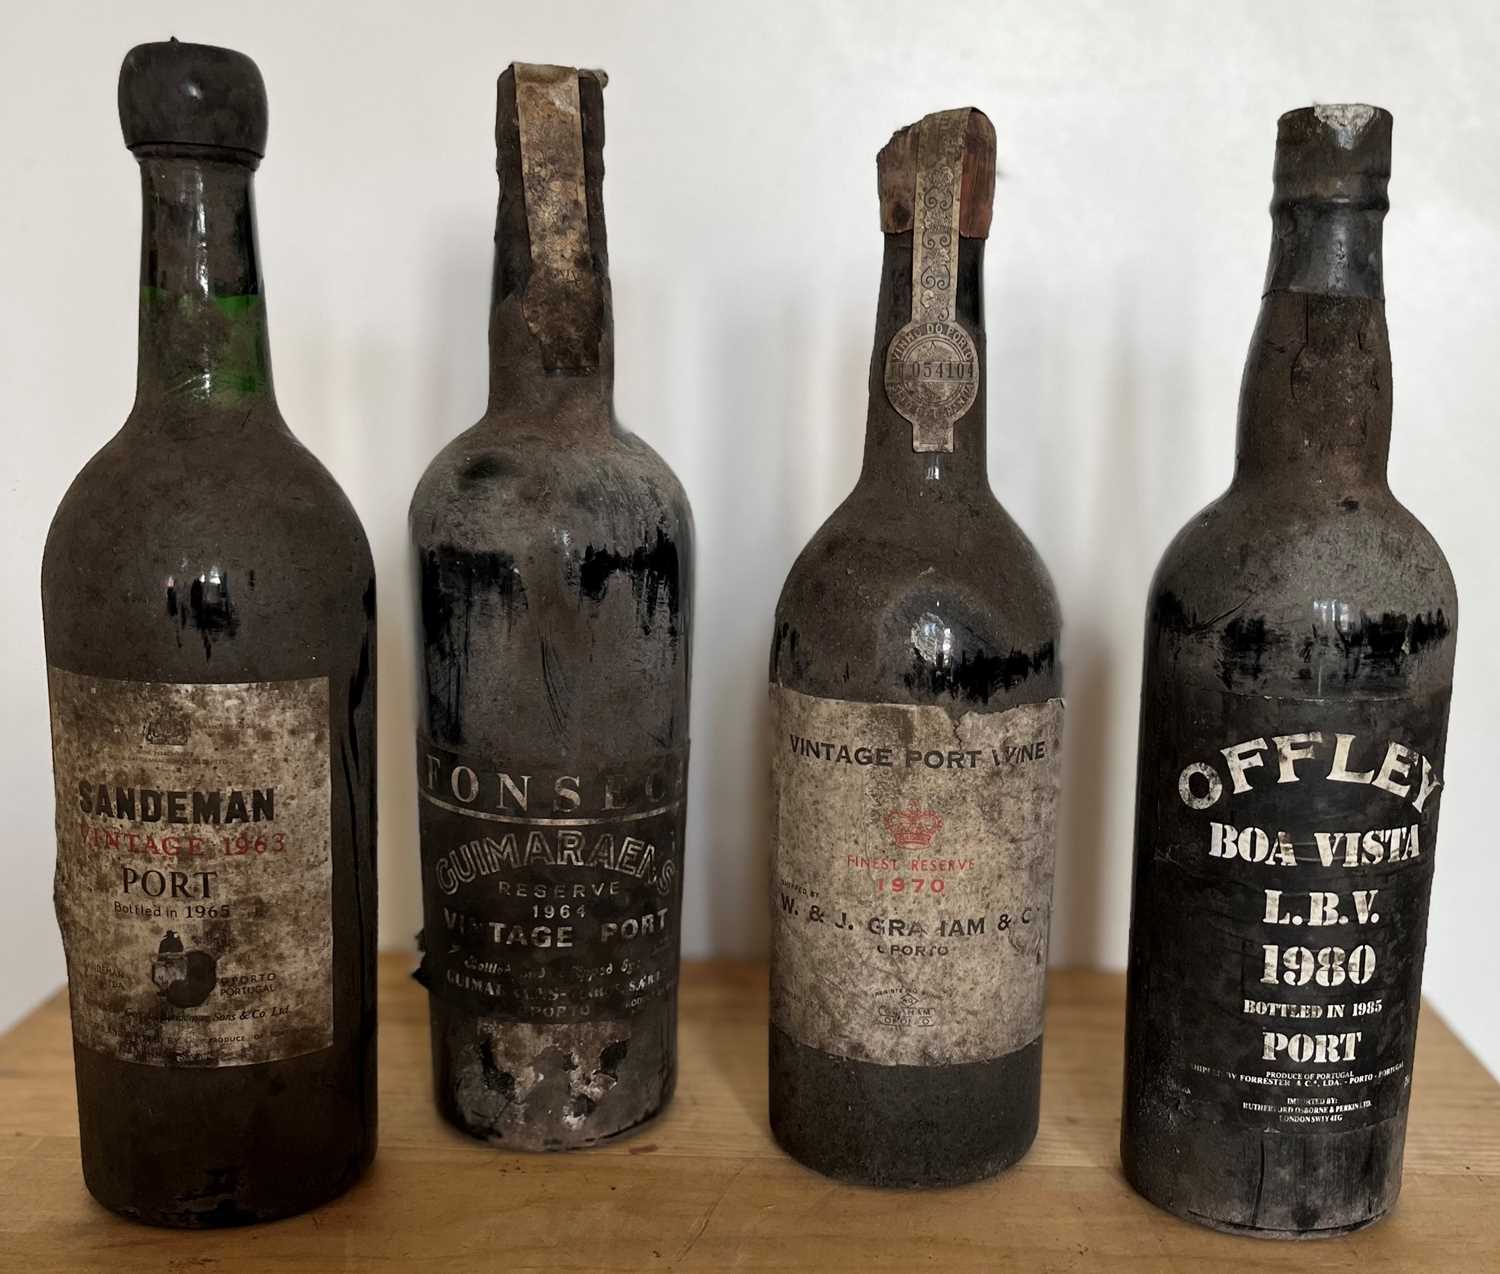 Lot 63 - 4 Bottles Mixed Lot well-cellared Vintage Port